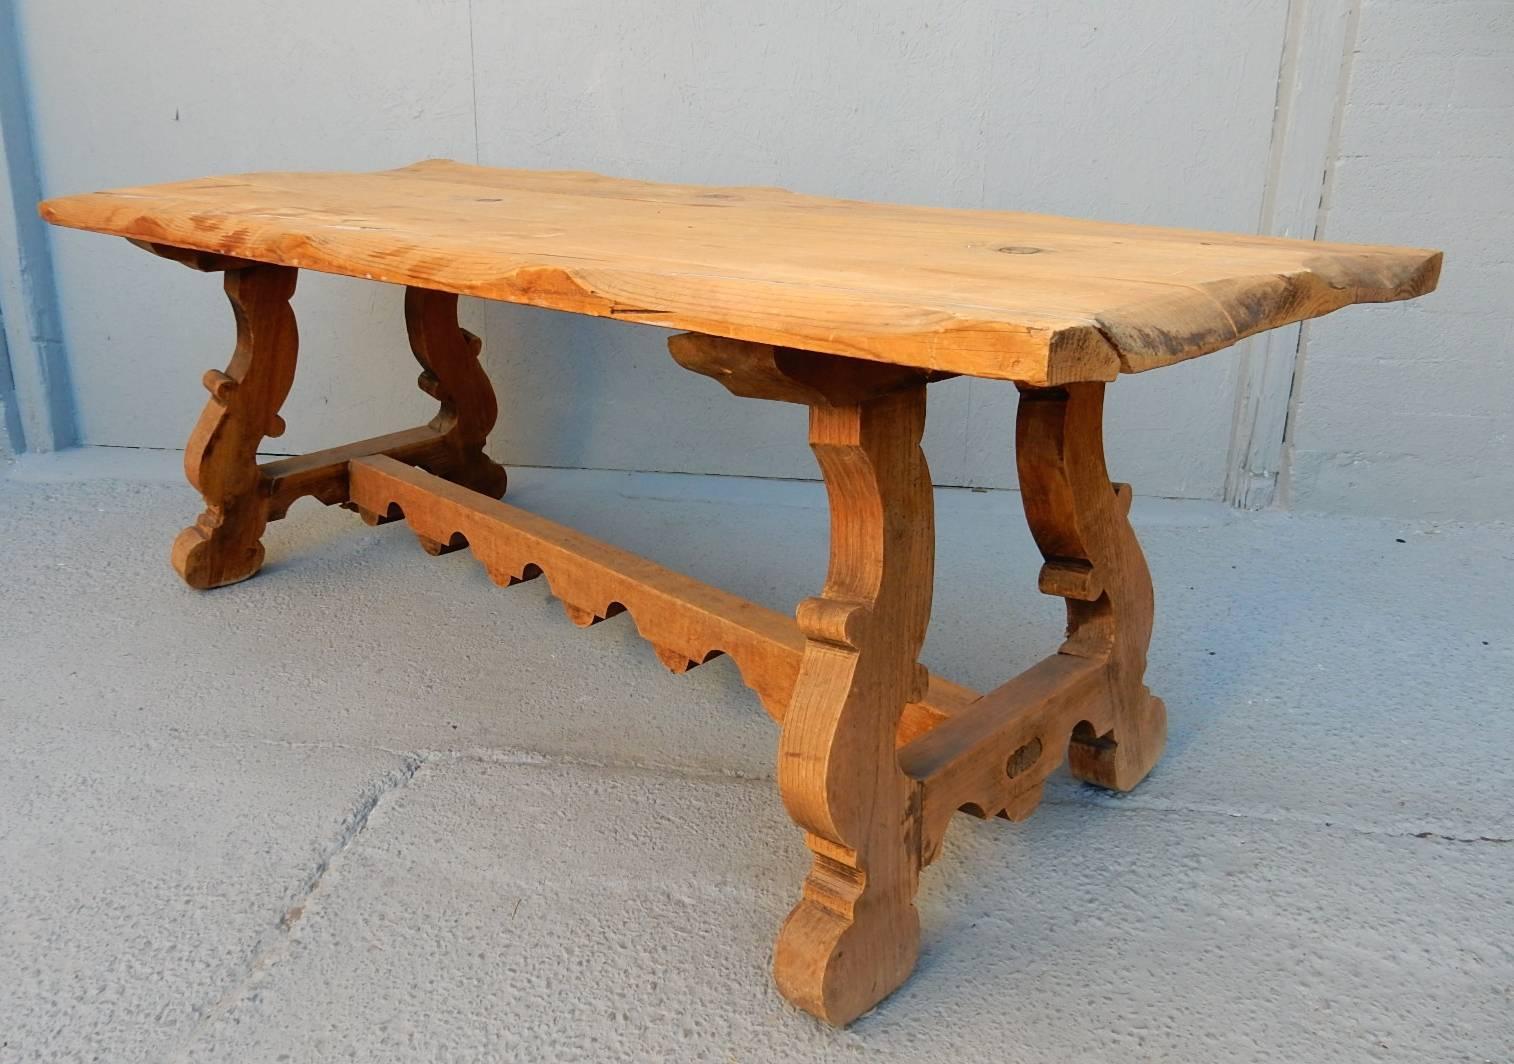 Hand-carved Primitive farm table circa early 1900s. All jointed and hand cut boards. Heavy thick hardwood top. Original condition.